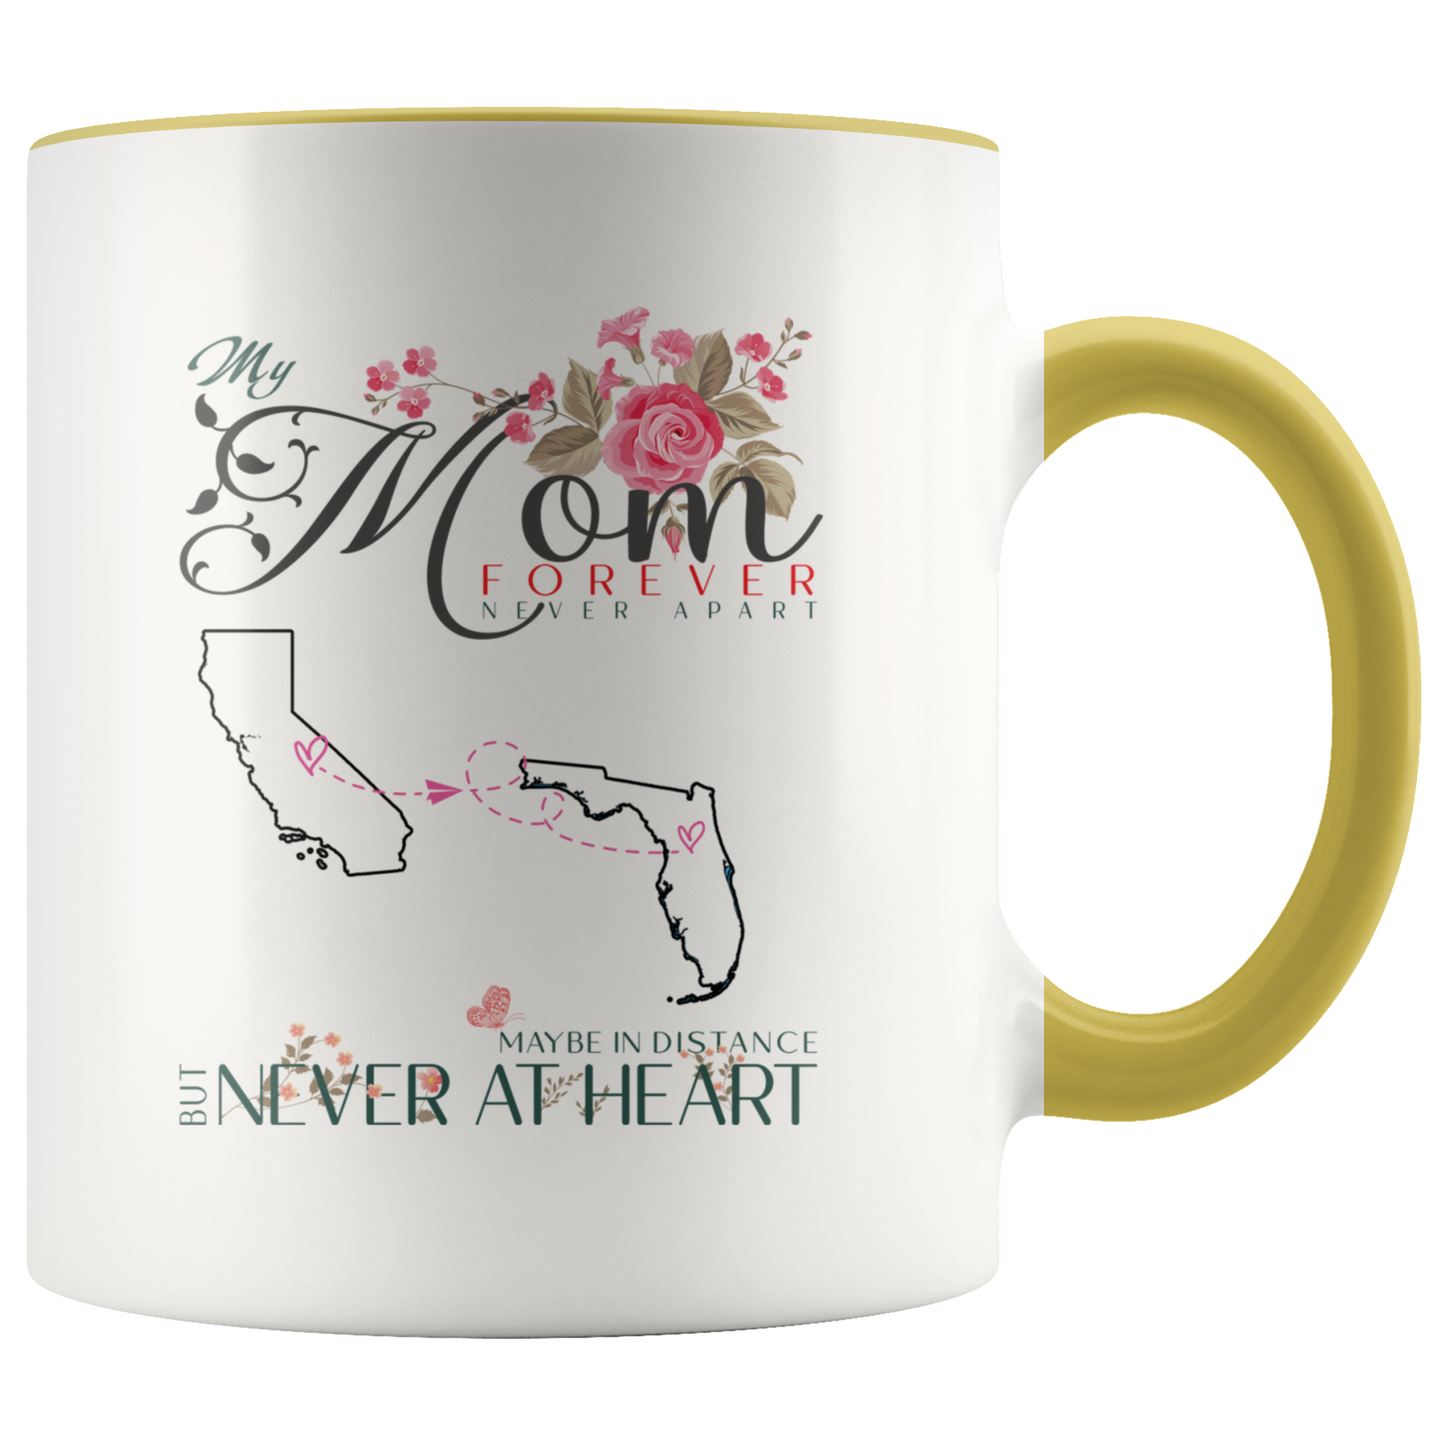 M-20321571-sp-27271 - [ California | Florida ] (CC_Accent_Mug_) Personalized Mothers Day Coffee Mug - My Mom Forever Never A